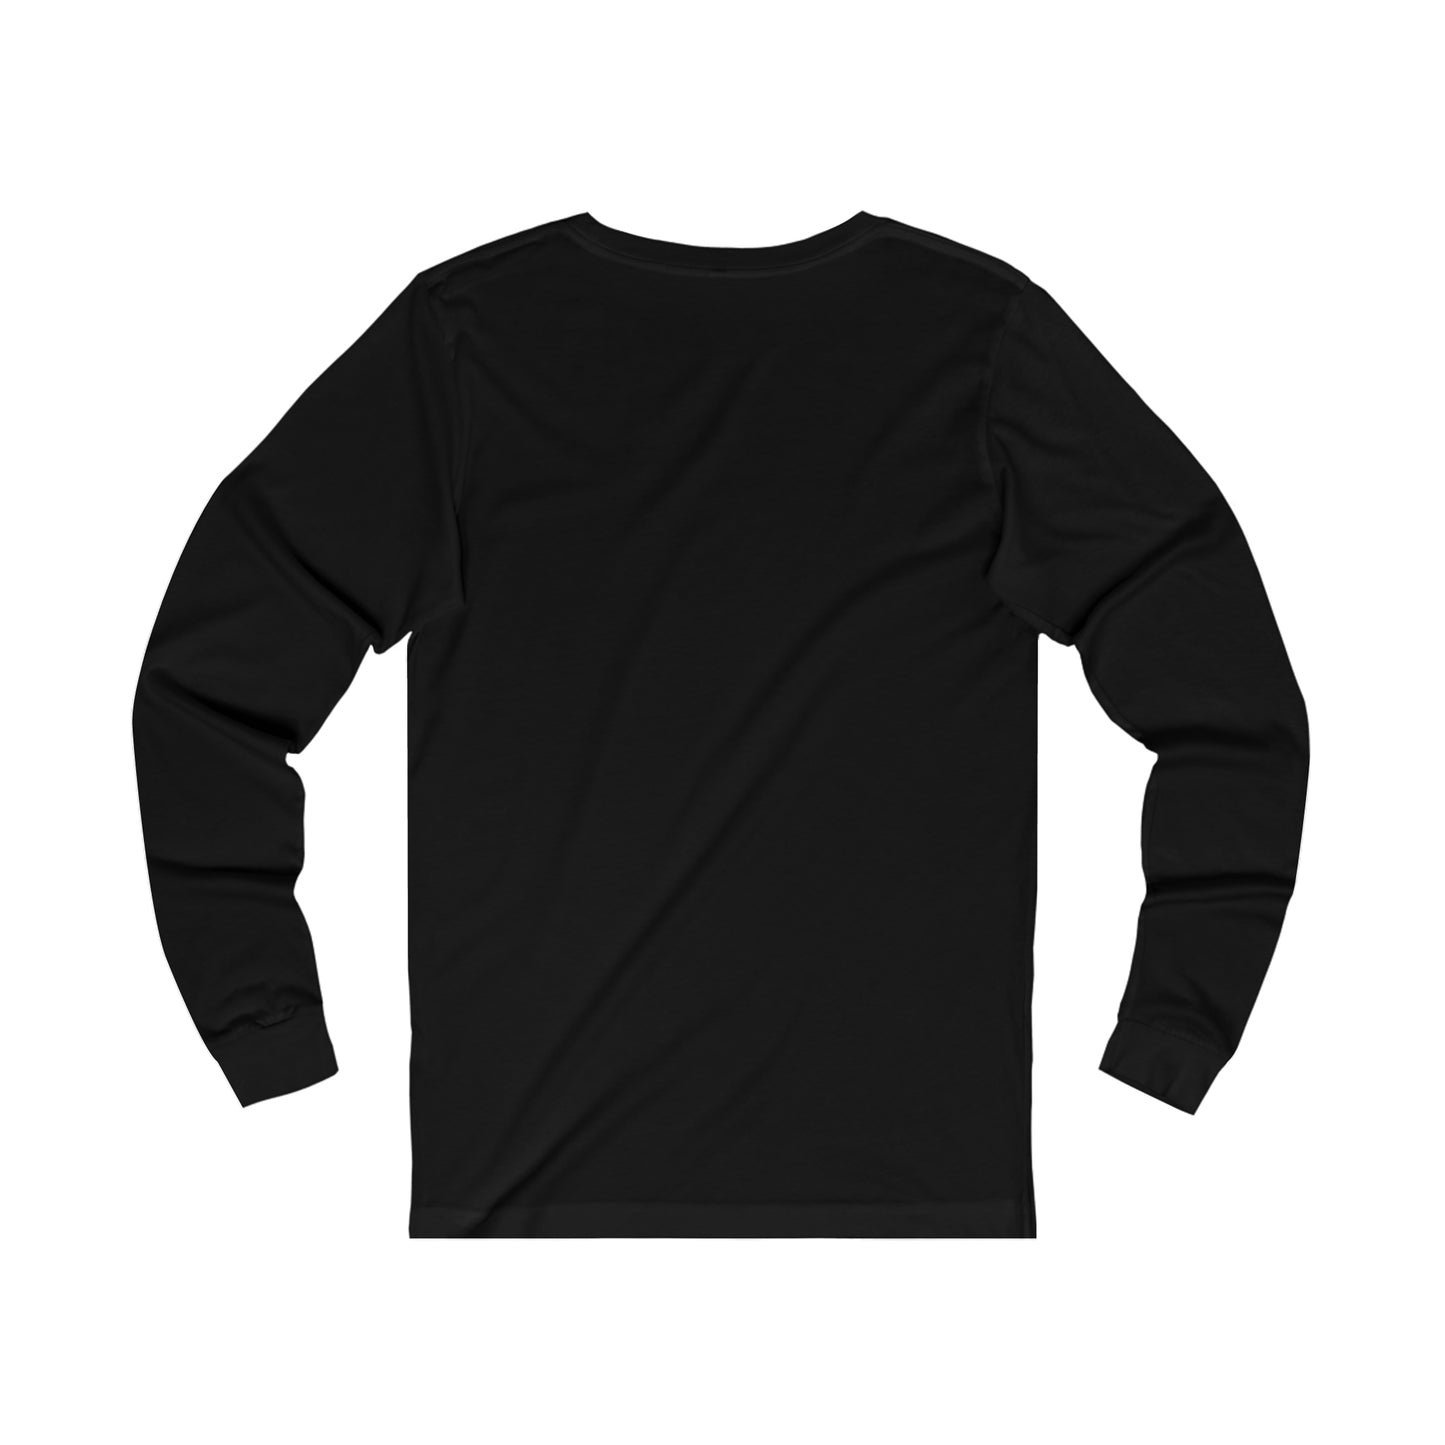 A Printify Unisex Jersey Long Sleeve Signature Logo Tee laid flat on a white background, showcasing its front view with no visible logos or designs, purchased in Cabbagetown, Toronto.